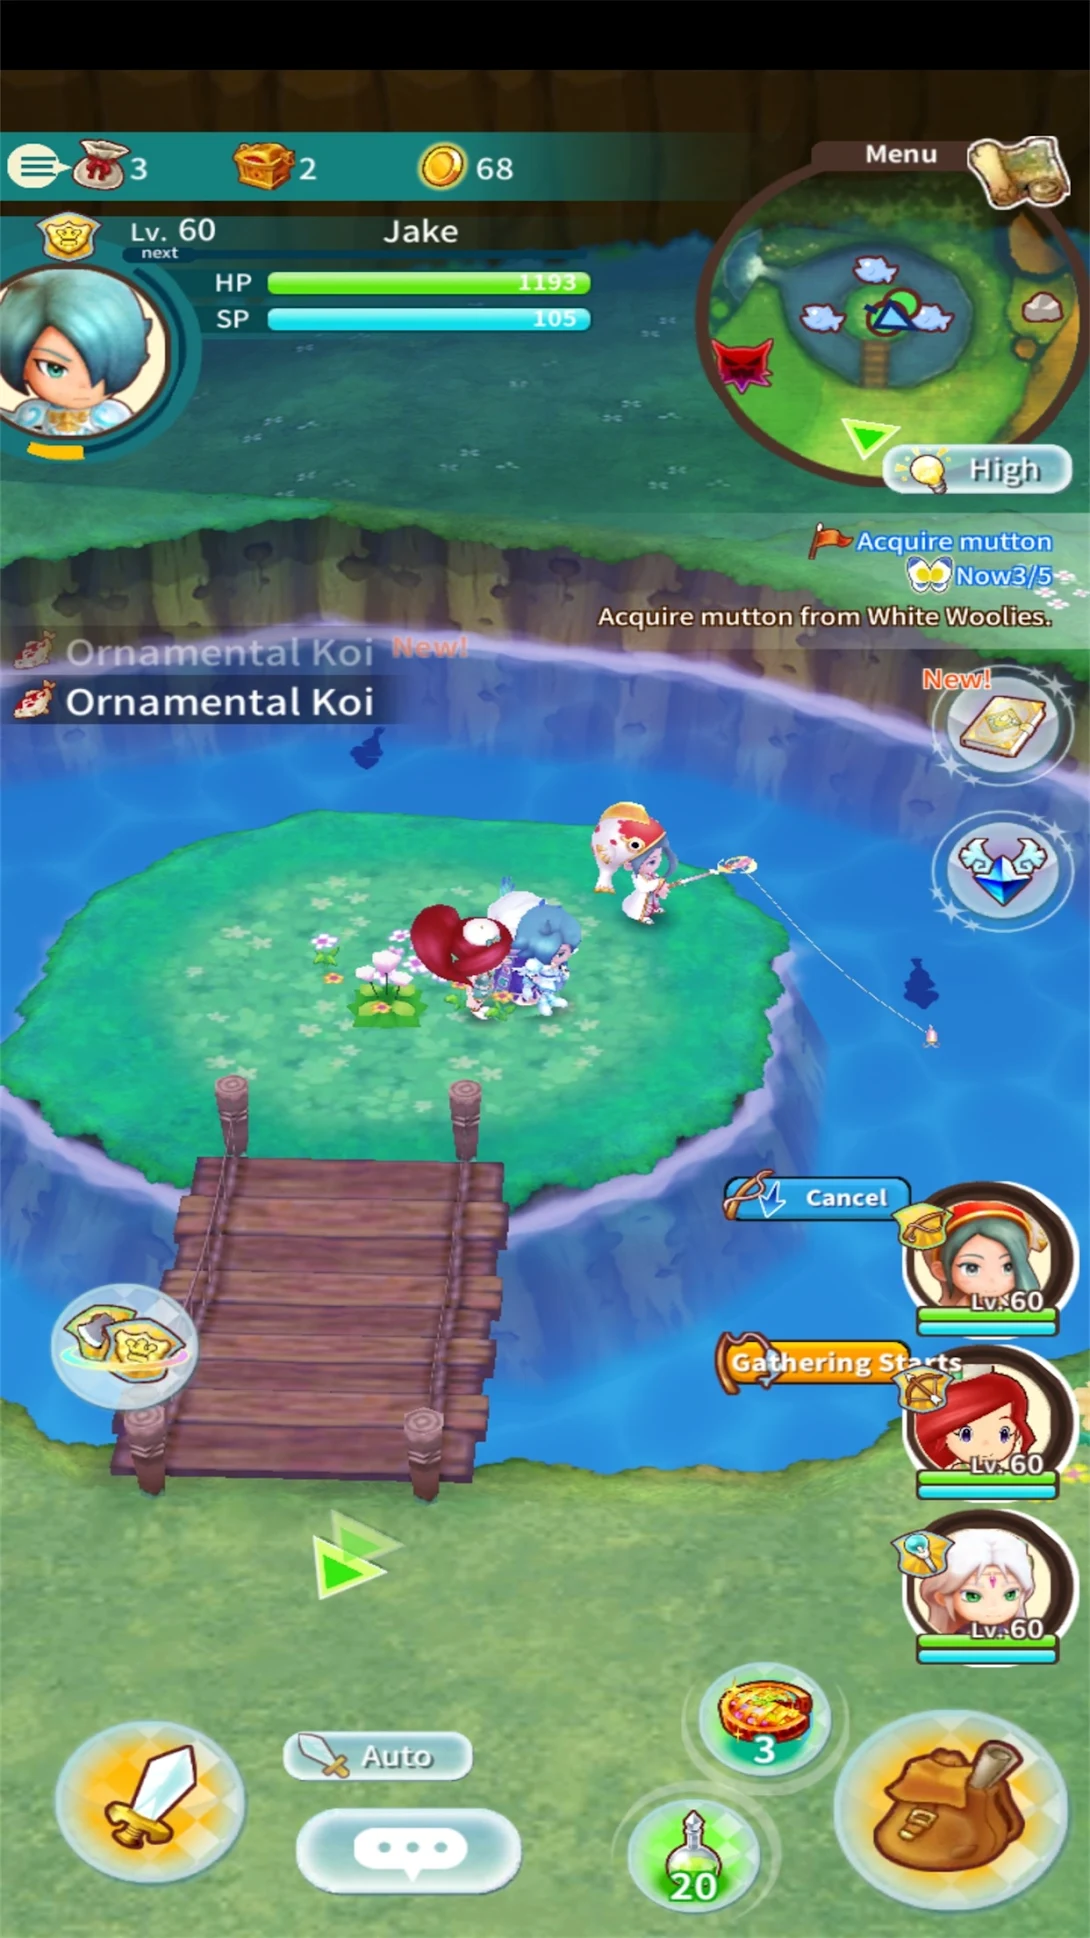 Fantasy Life Online' from Boltrend Games and Level-5 Can Now Be Downloaded  Ahead of Servers Going Live Later Today – TouchArcade